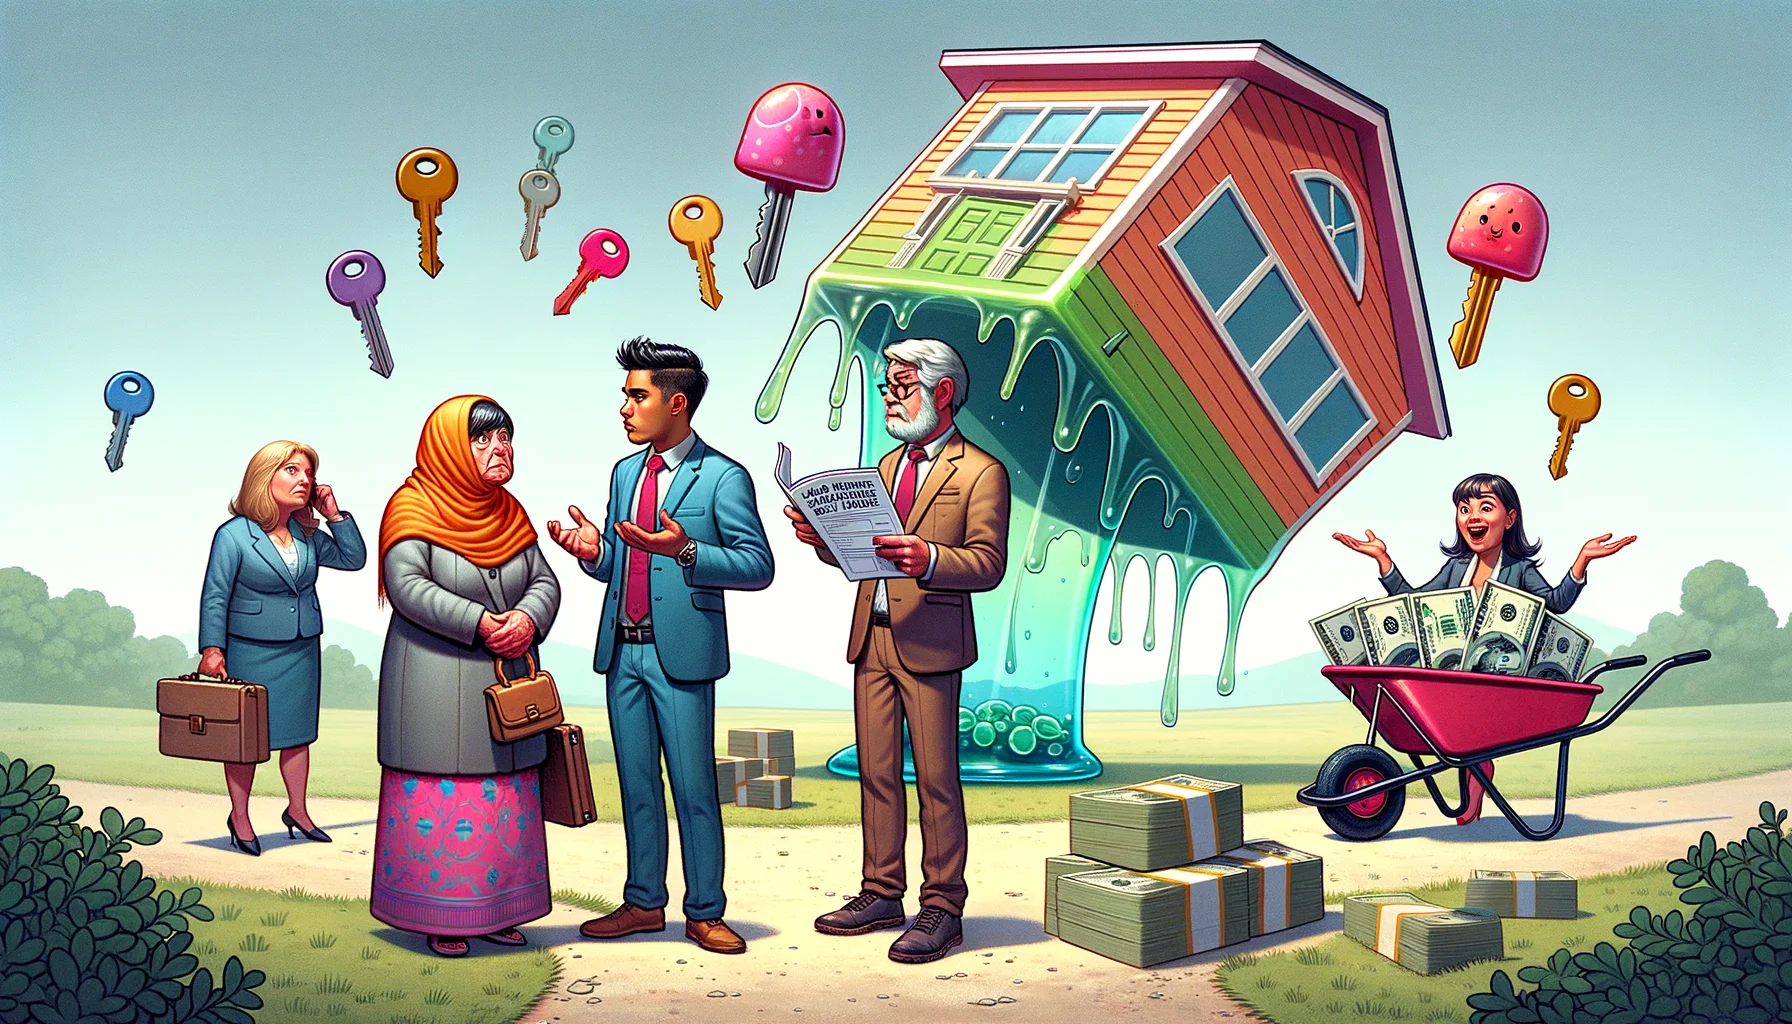 A humorous illustration of a homebuyers assistance program. Include a middle-aged Middle-Eastern woman and a young South Asian man standing in front of an oversized, colourful house that's tipping to one side as if it were made of jelly. They look baffled, holding giant keys. Next to them, a perky agent, a Caucasian man with a wheelbarrow full of smaller keys, is showing a manual titled 'How to straighten your Jelly House'. A Hispanic female banker in the background is laughing while counting oversized and elongated dollar bills.